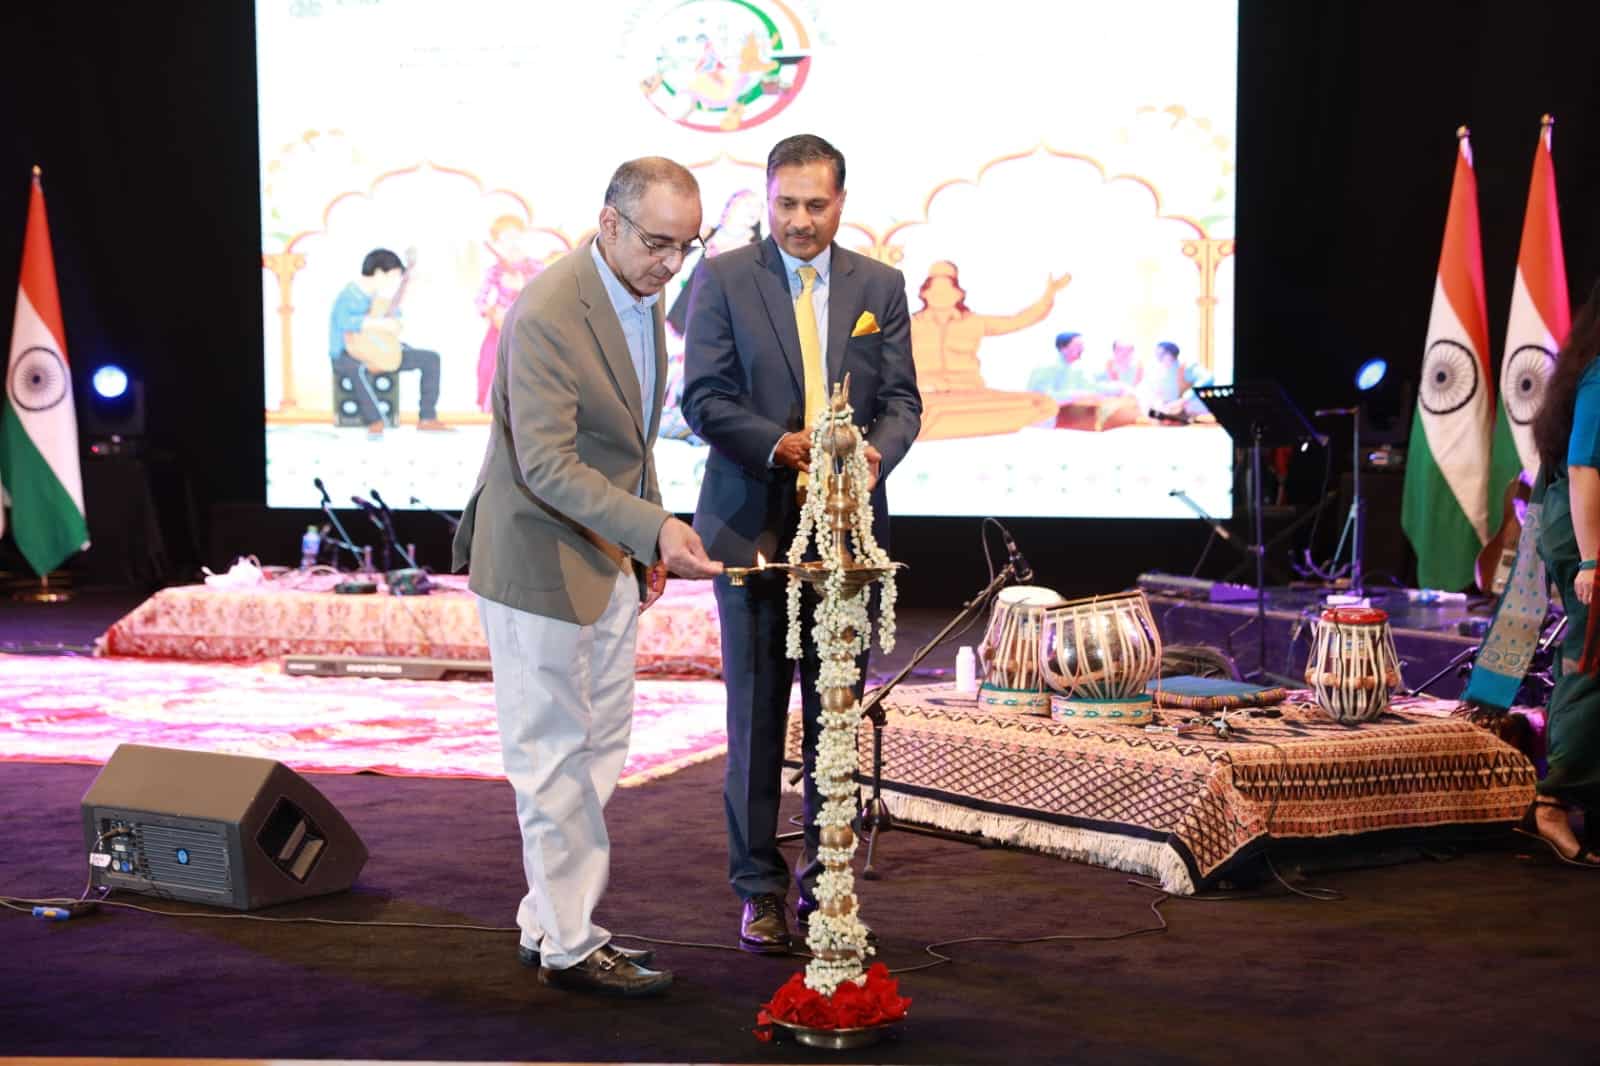 Indian Ambassador to Kuwait Dr Adarsh Swaika lighting the lamp to inaugurate the event.